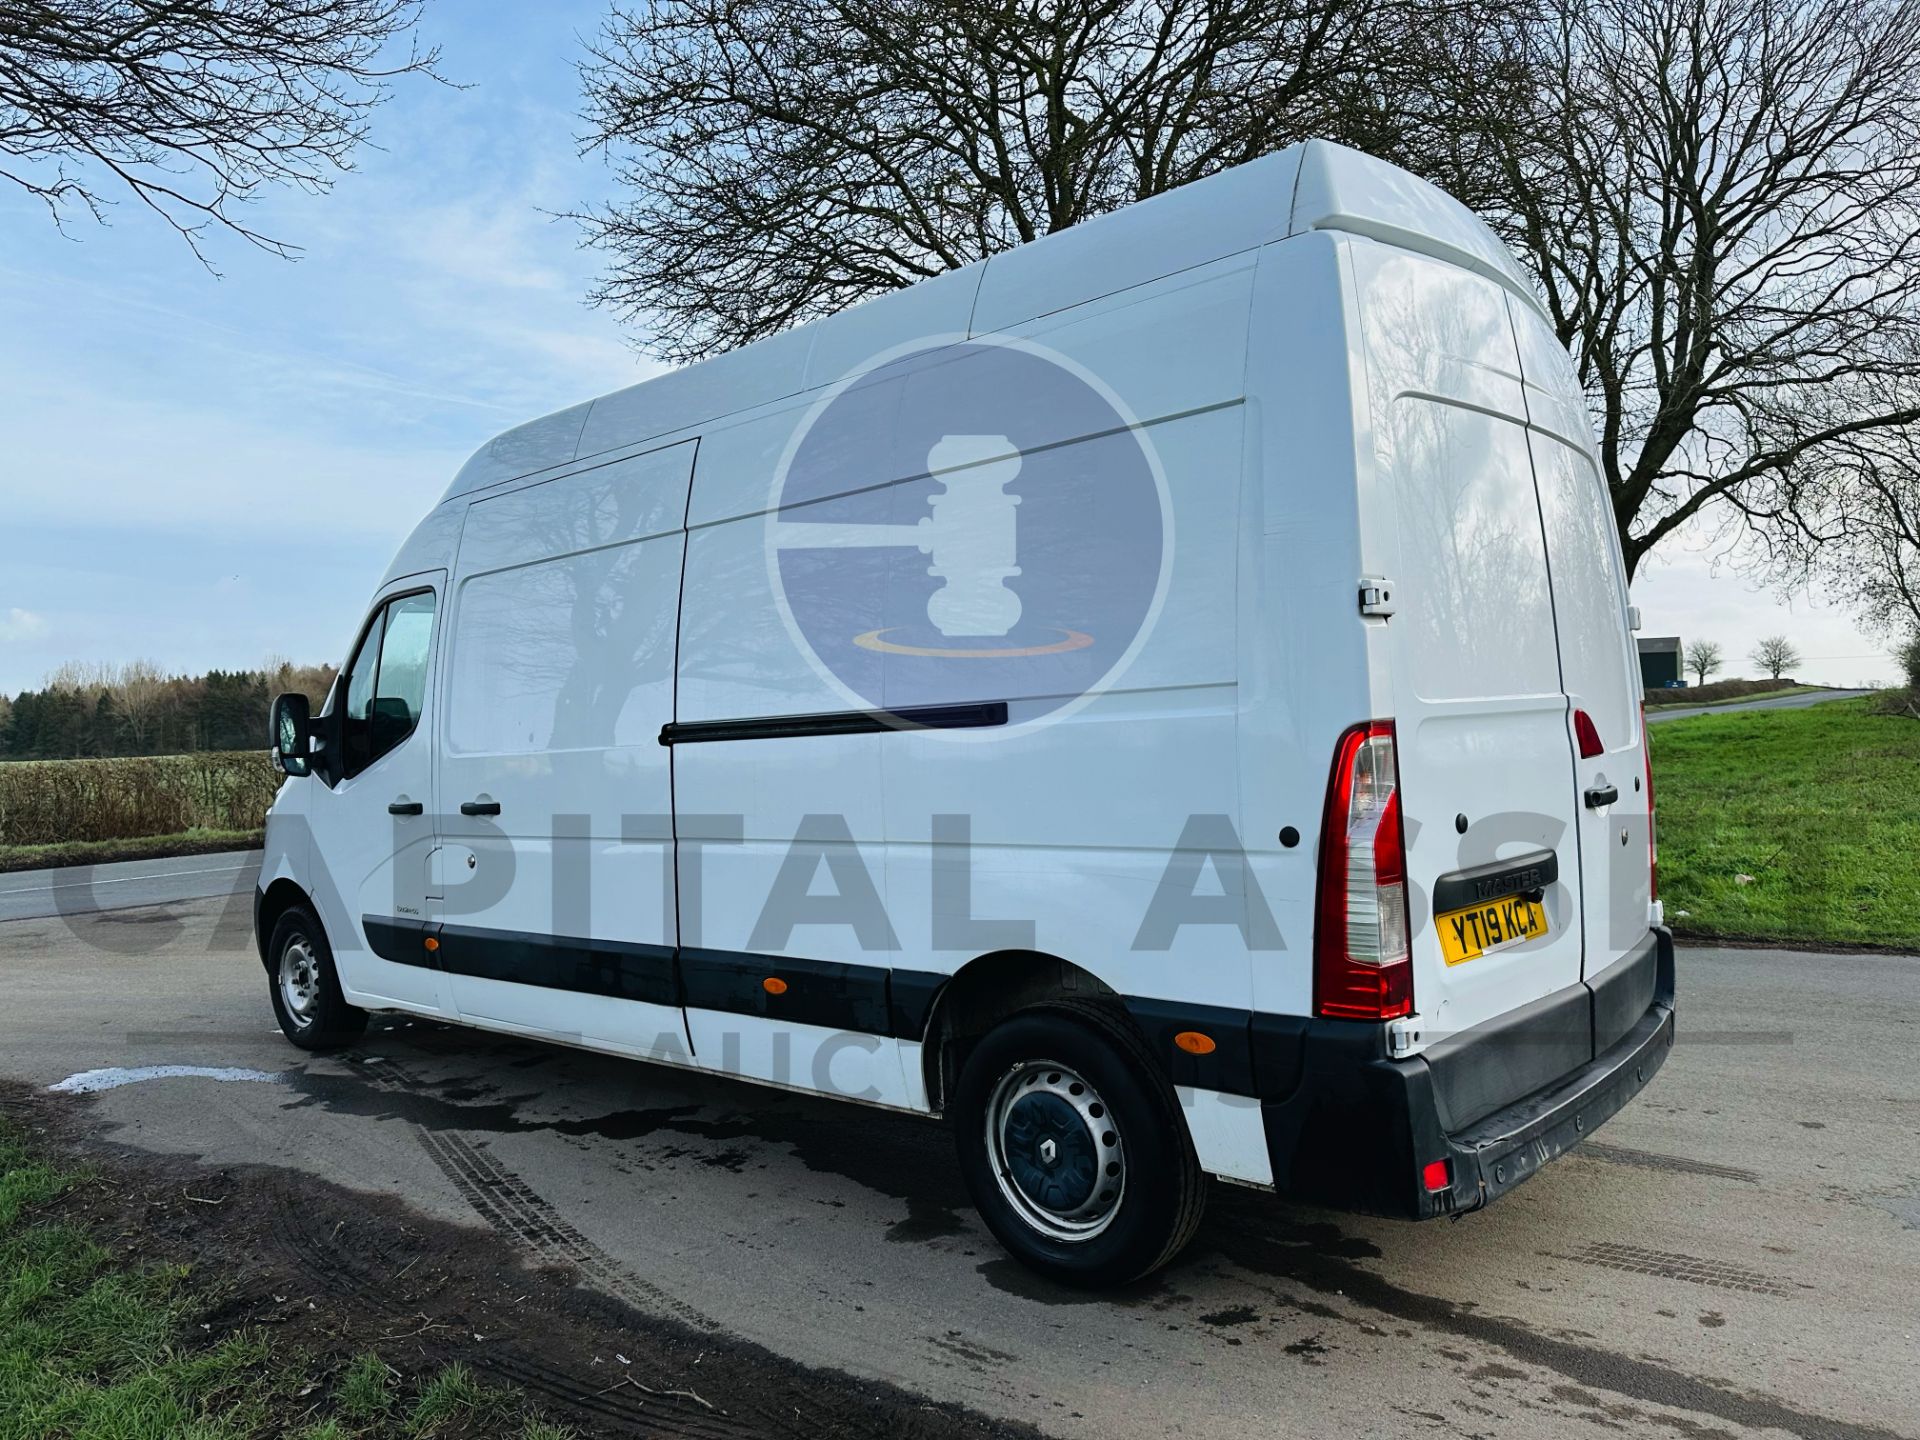 (On Sale) RENAULT MASTER *BUSINESS ENERGY* LWB EXTRA HI-ROOF (2019 - EURO 6) 2.3 DCI - 145 BHP - Image 6 of 25